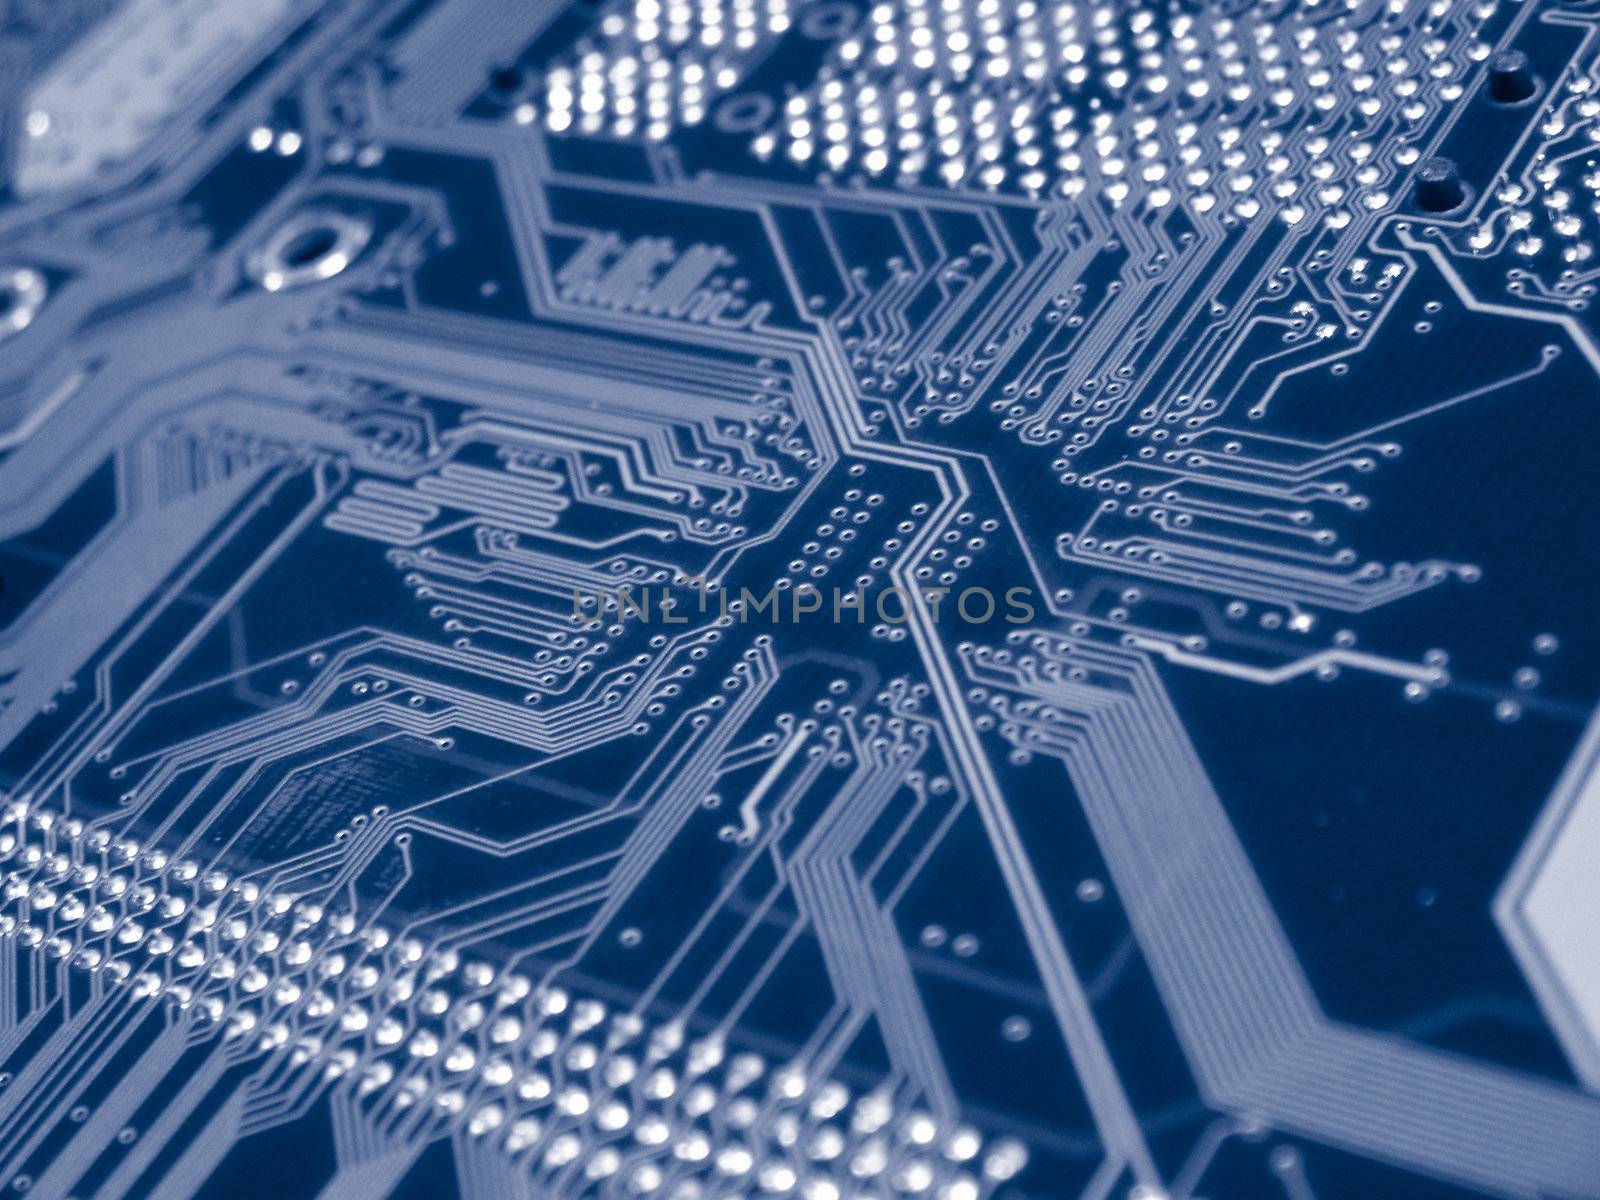 A shot of the back side of a new dual processor computer mother board.  This image is a nice background image for print material related to computer technology.